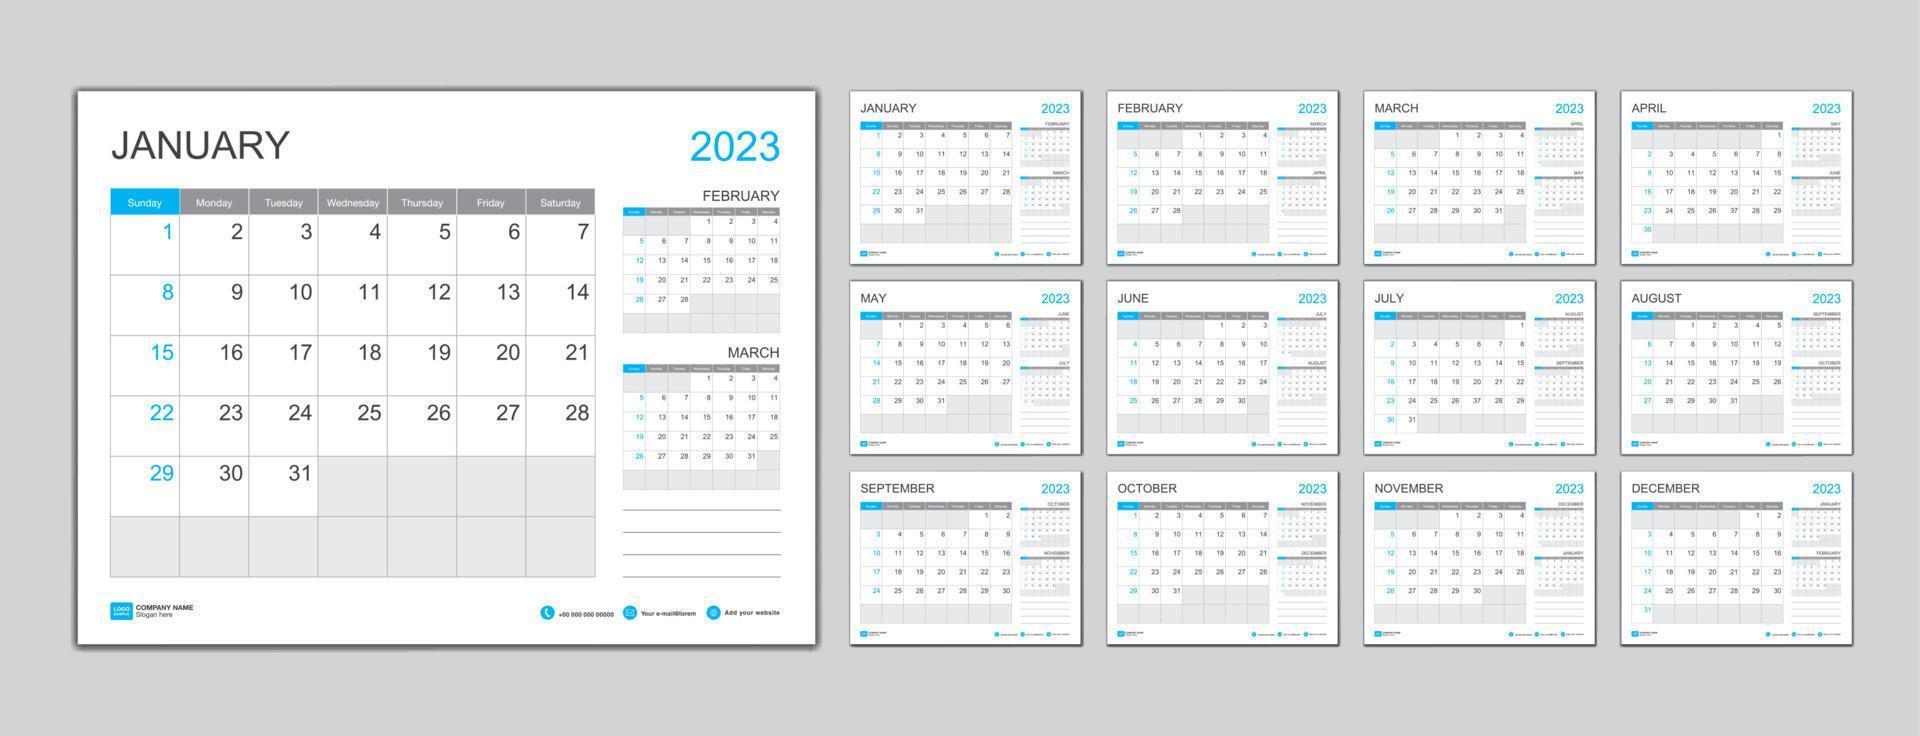 Monthly calendar template for 2023 year, Planner 2023 year, Week Starts on Sunday. Wall calendar in a minimalist style, desk calendar 2023 template, New Year Calendar Design, Business template Vector